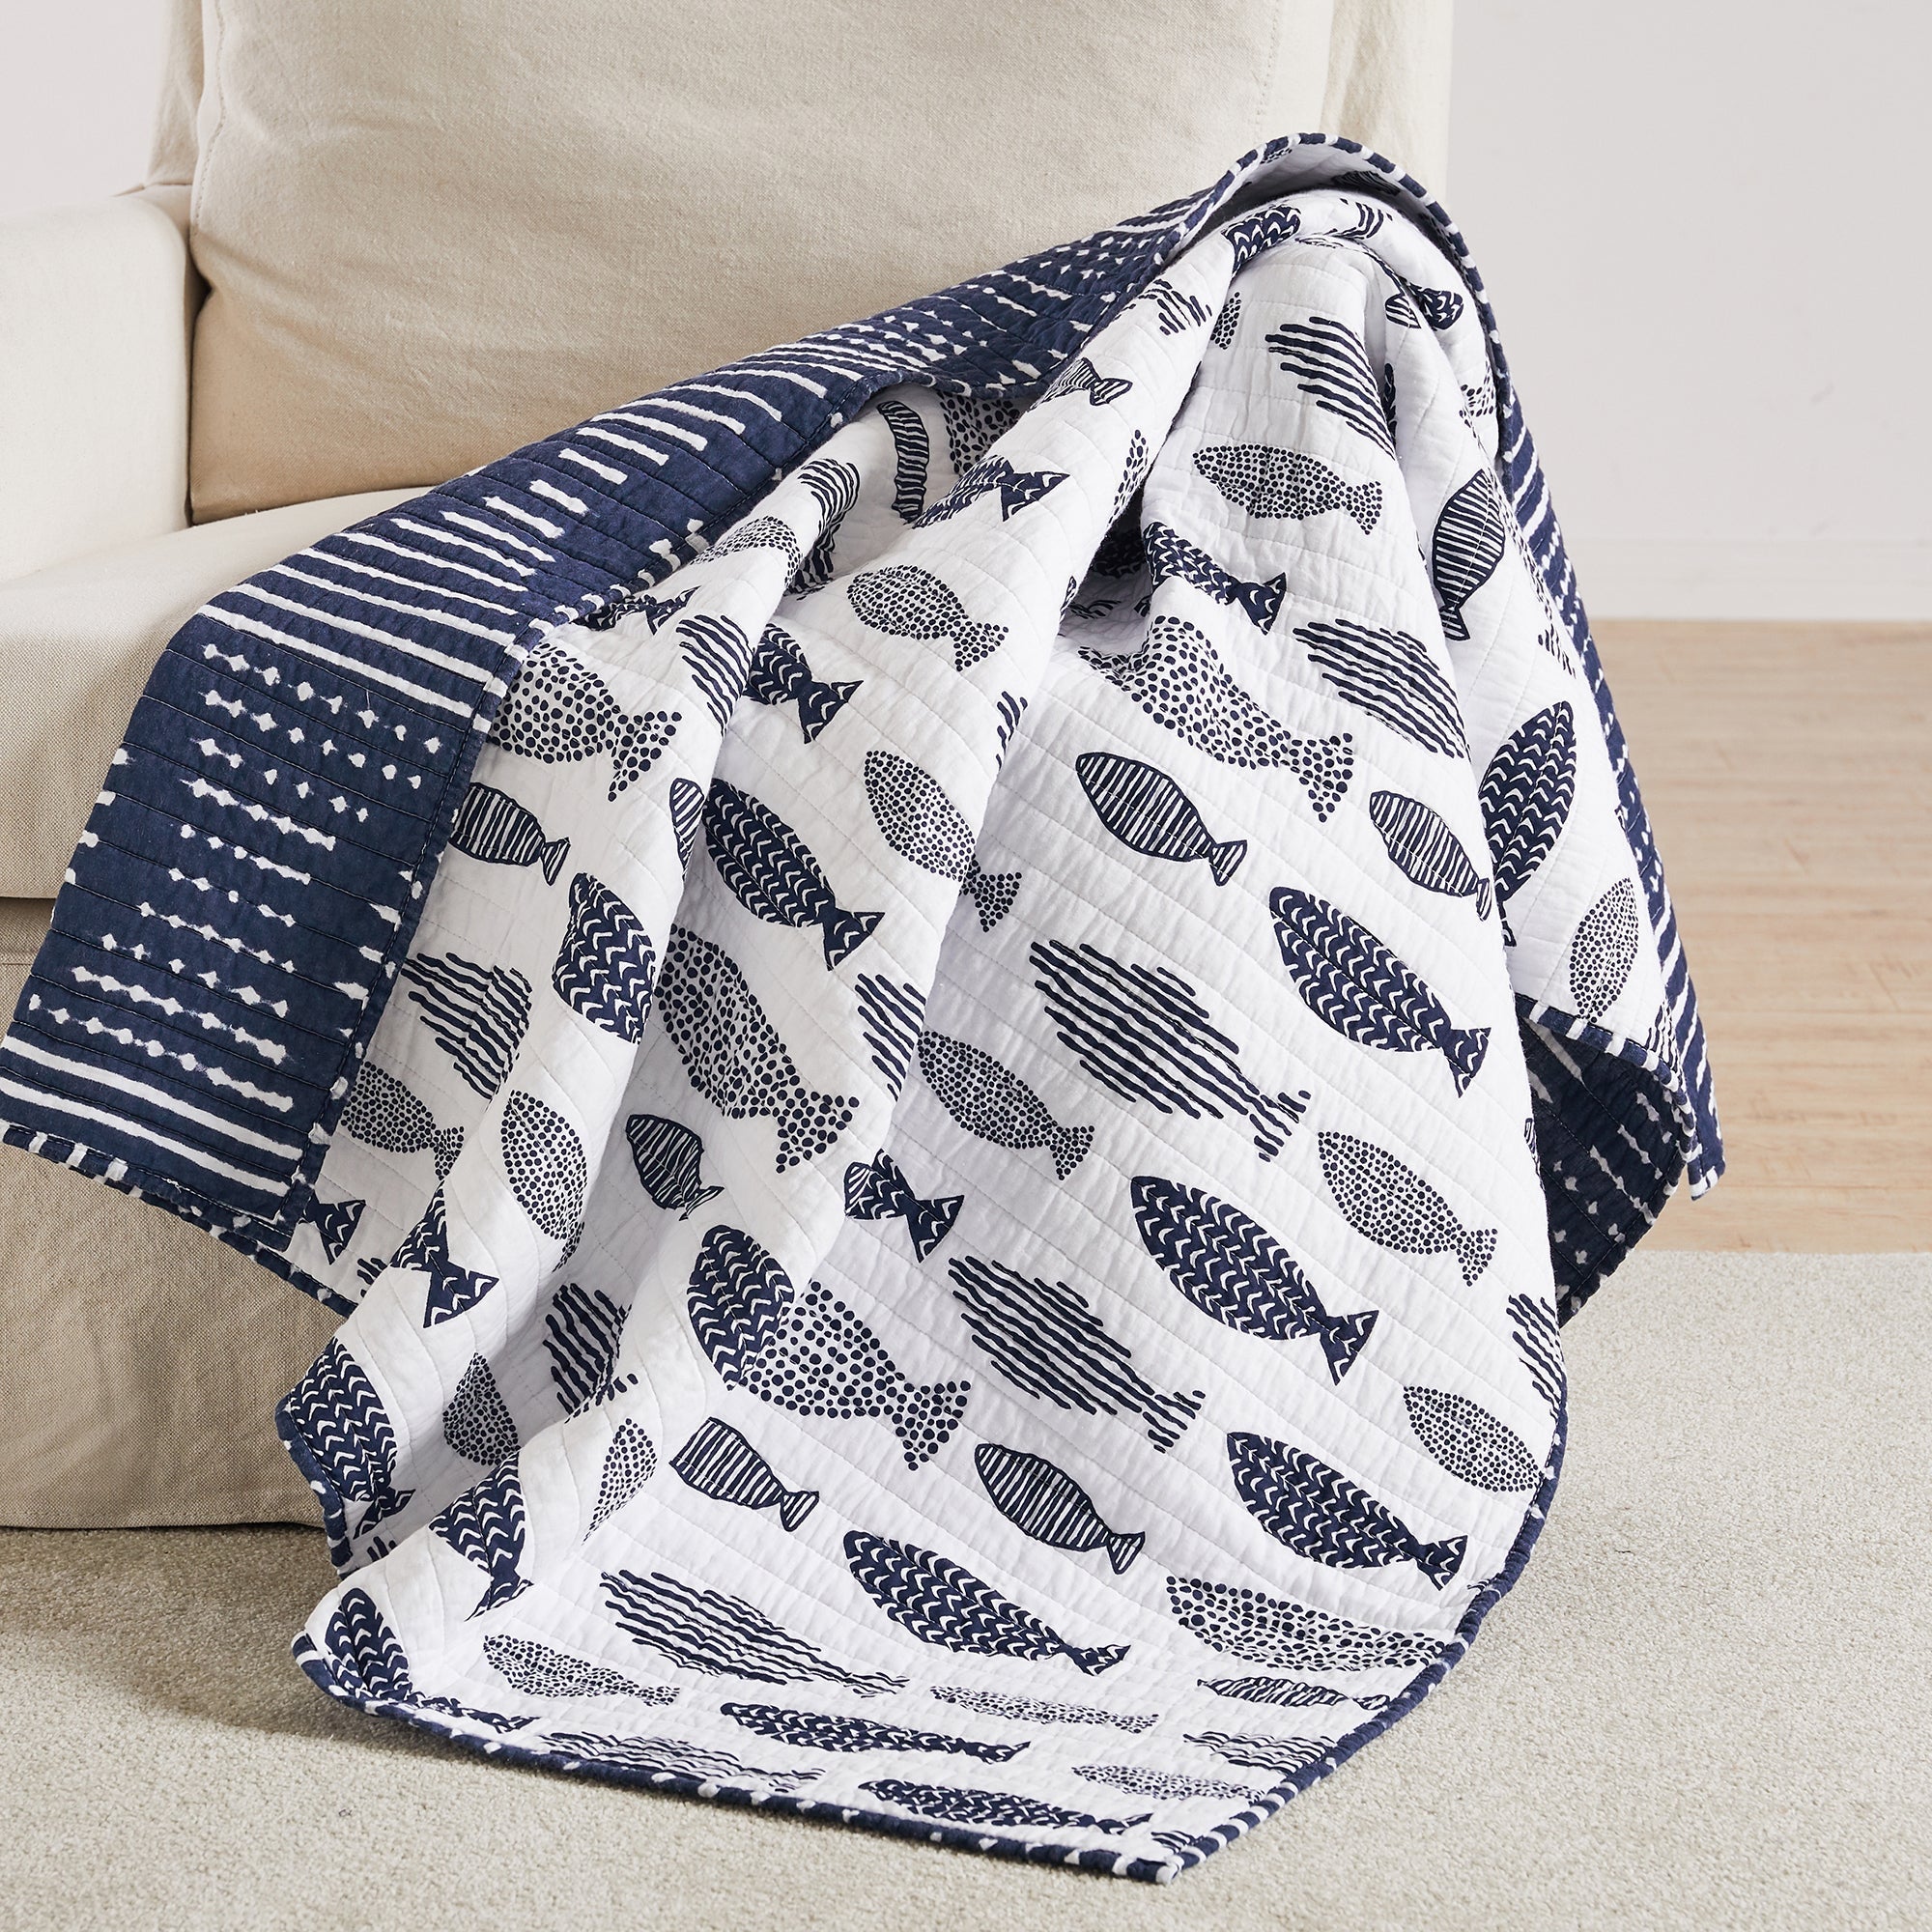 Bakio Quilted Throw